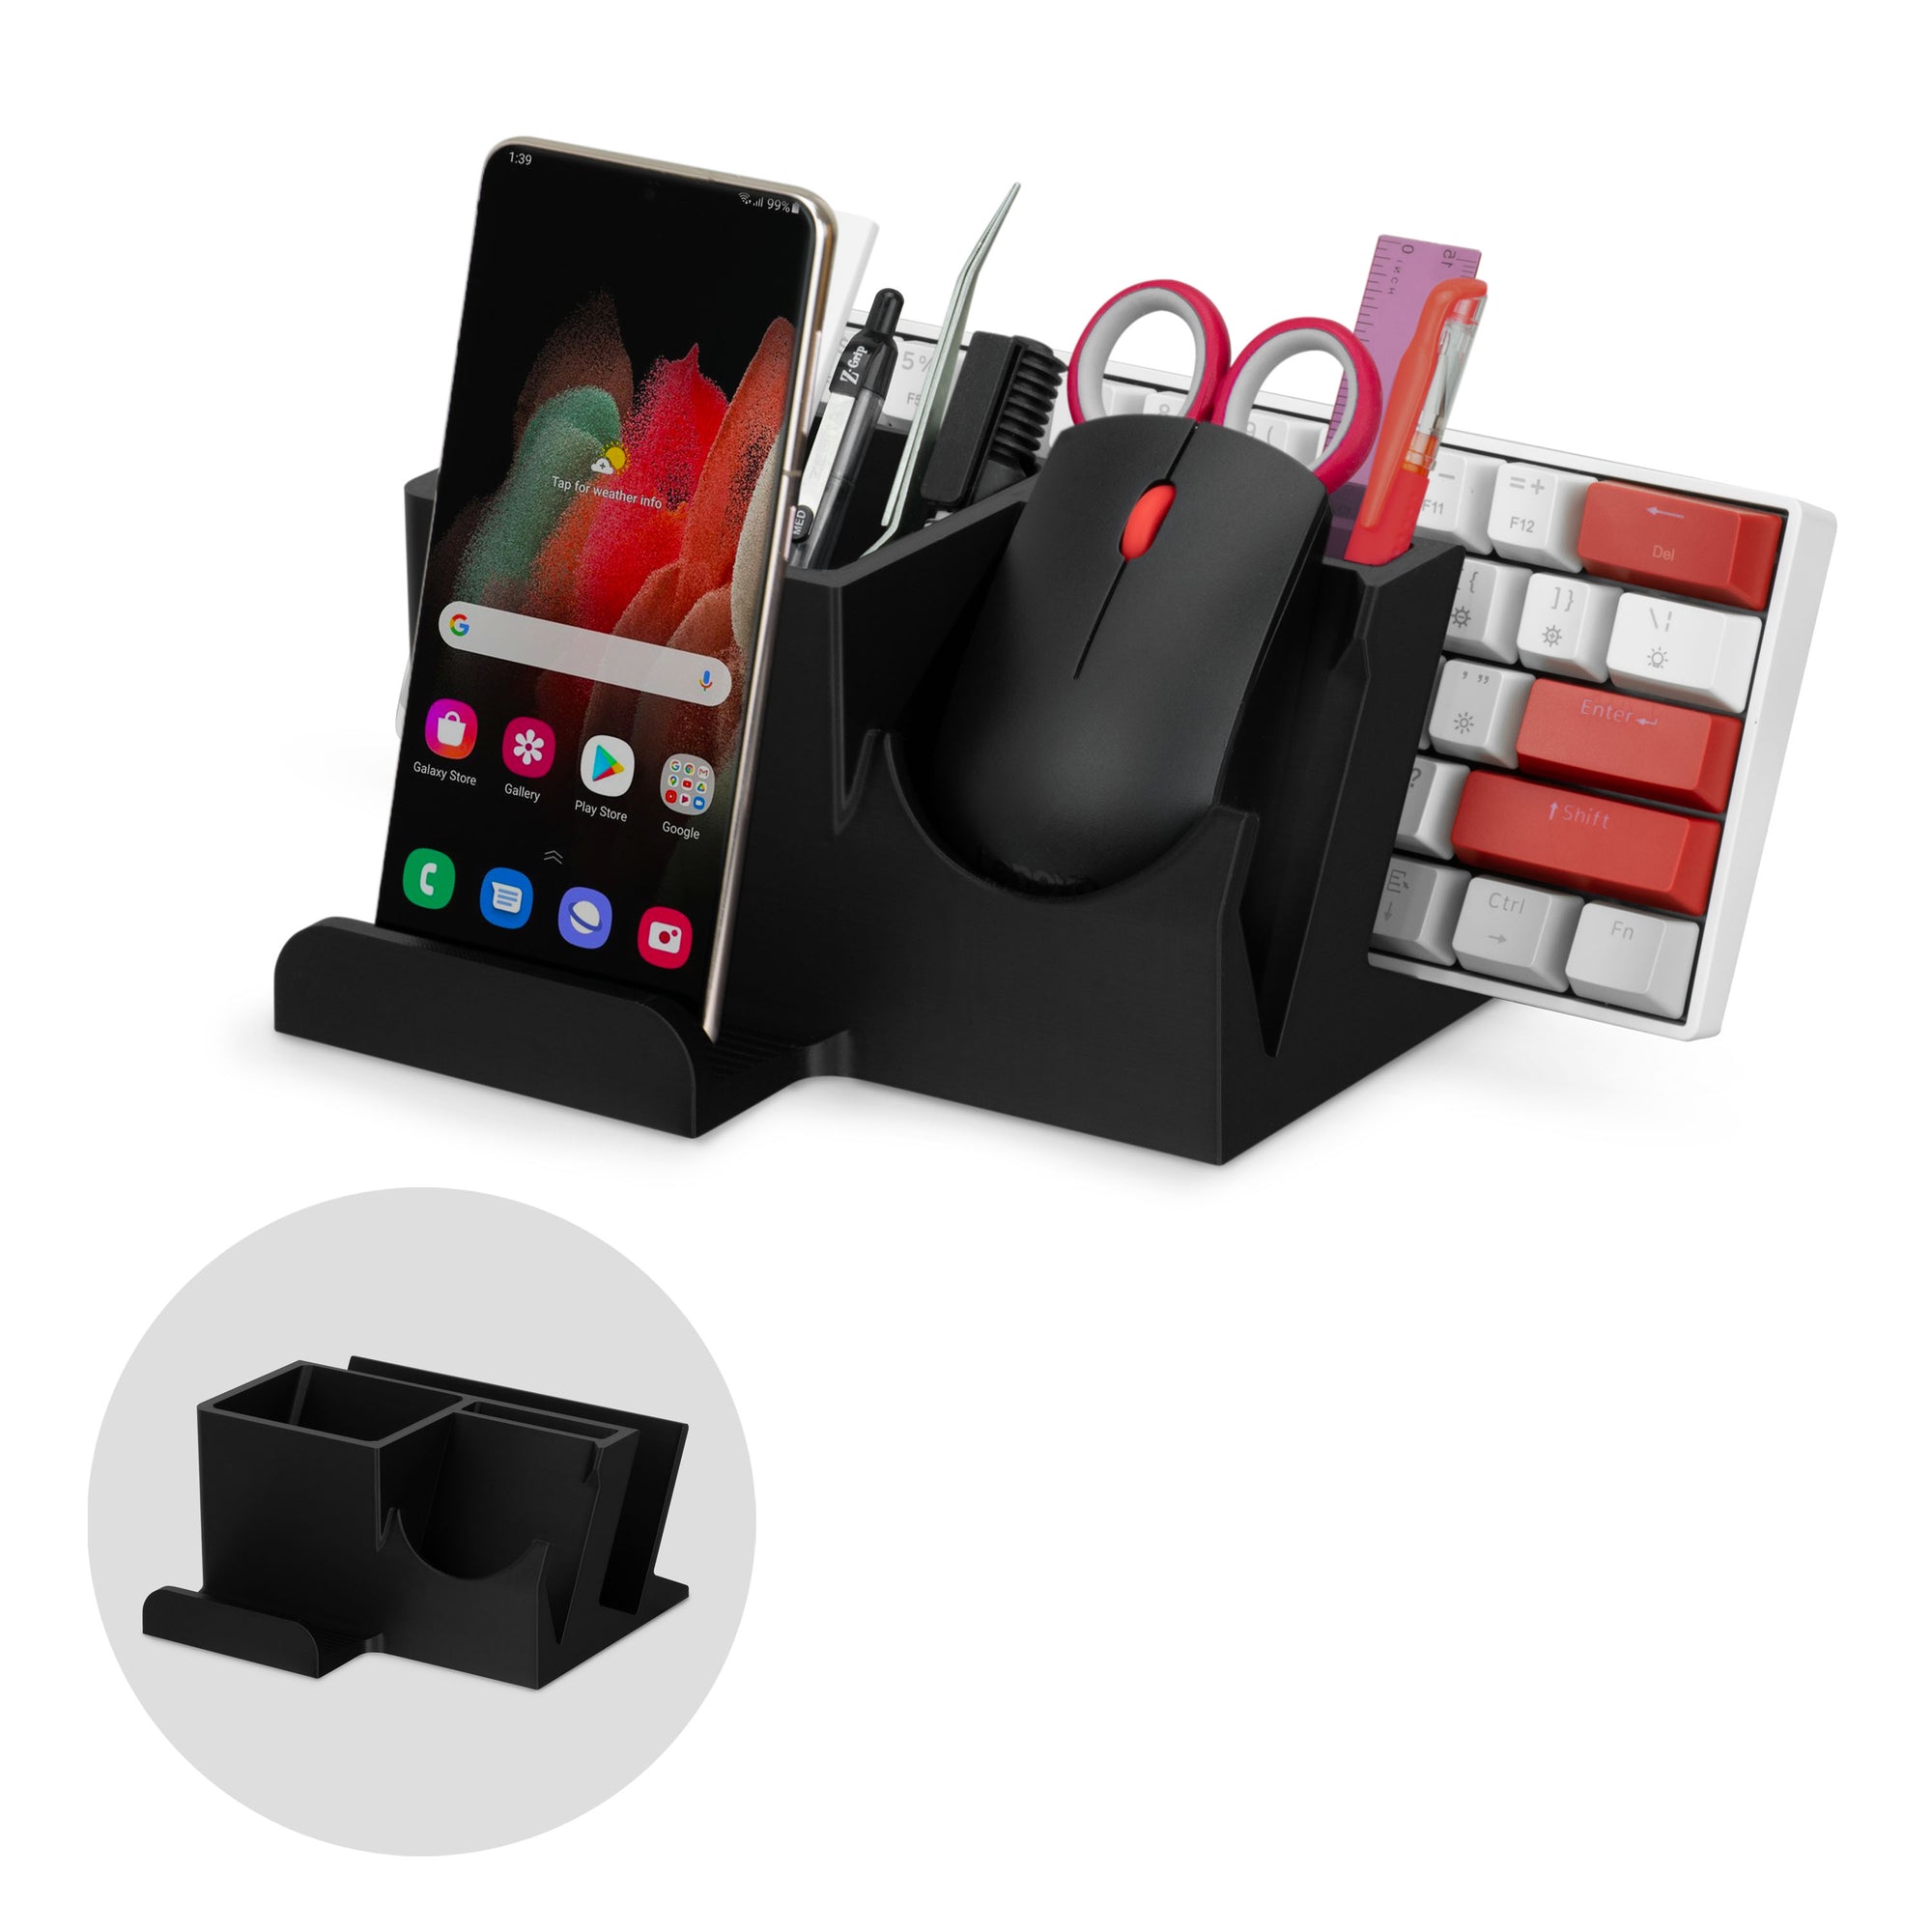 Desktop Keyboard, Mouse & Phone Stand Holder w/ Stationary Storage, Suitable for Small Or Large Keyboards, Tablets, Gaming & Office Mice